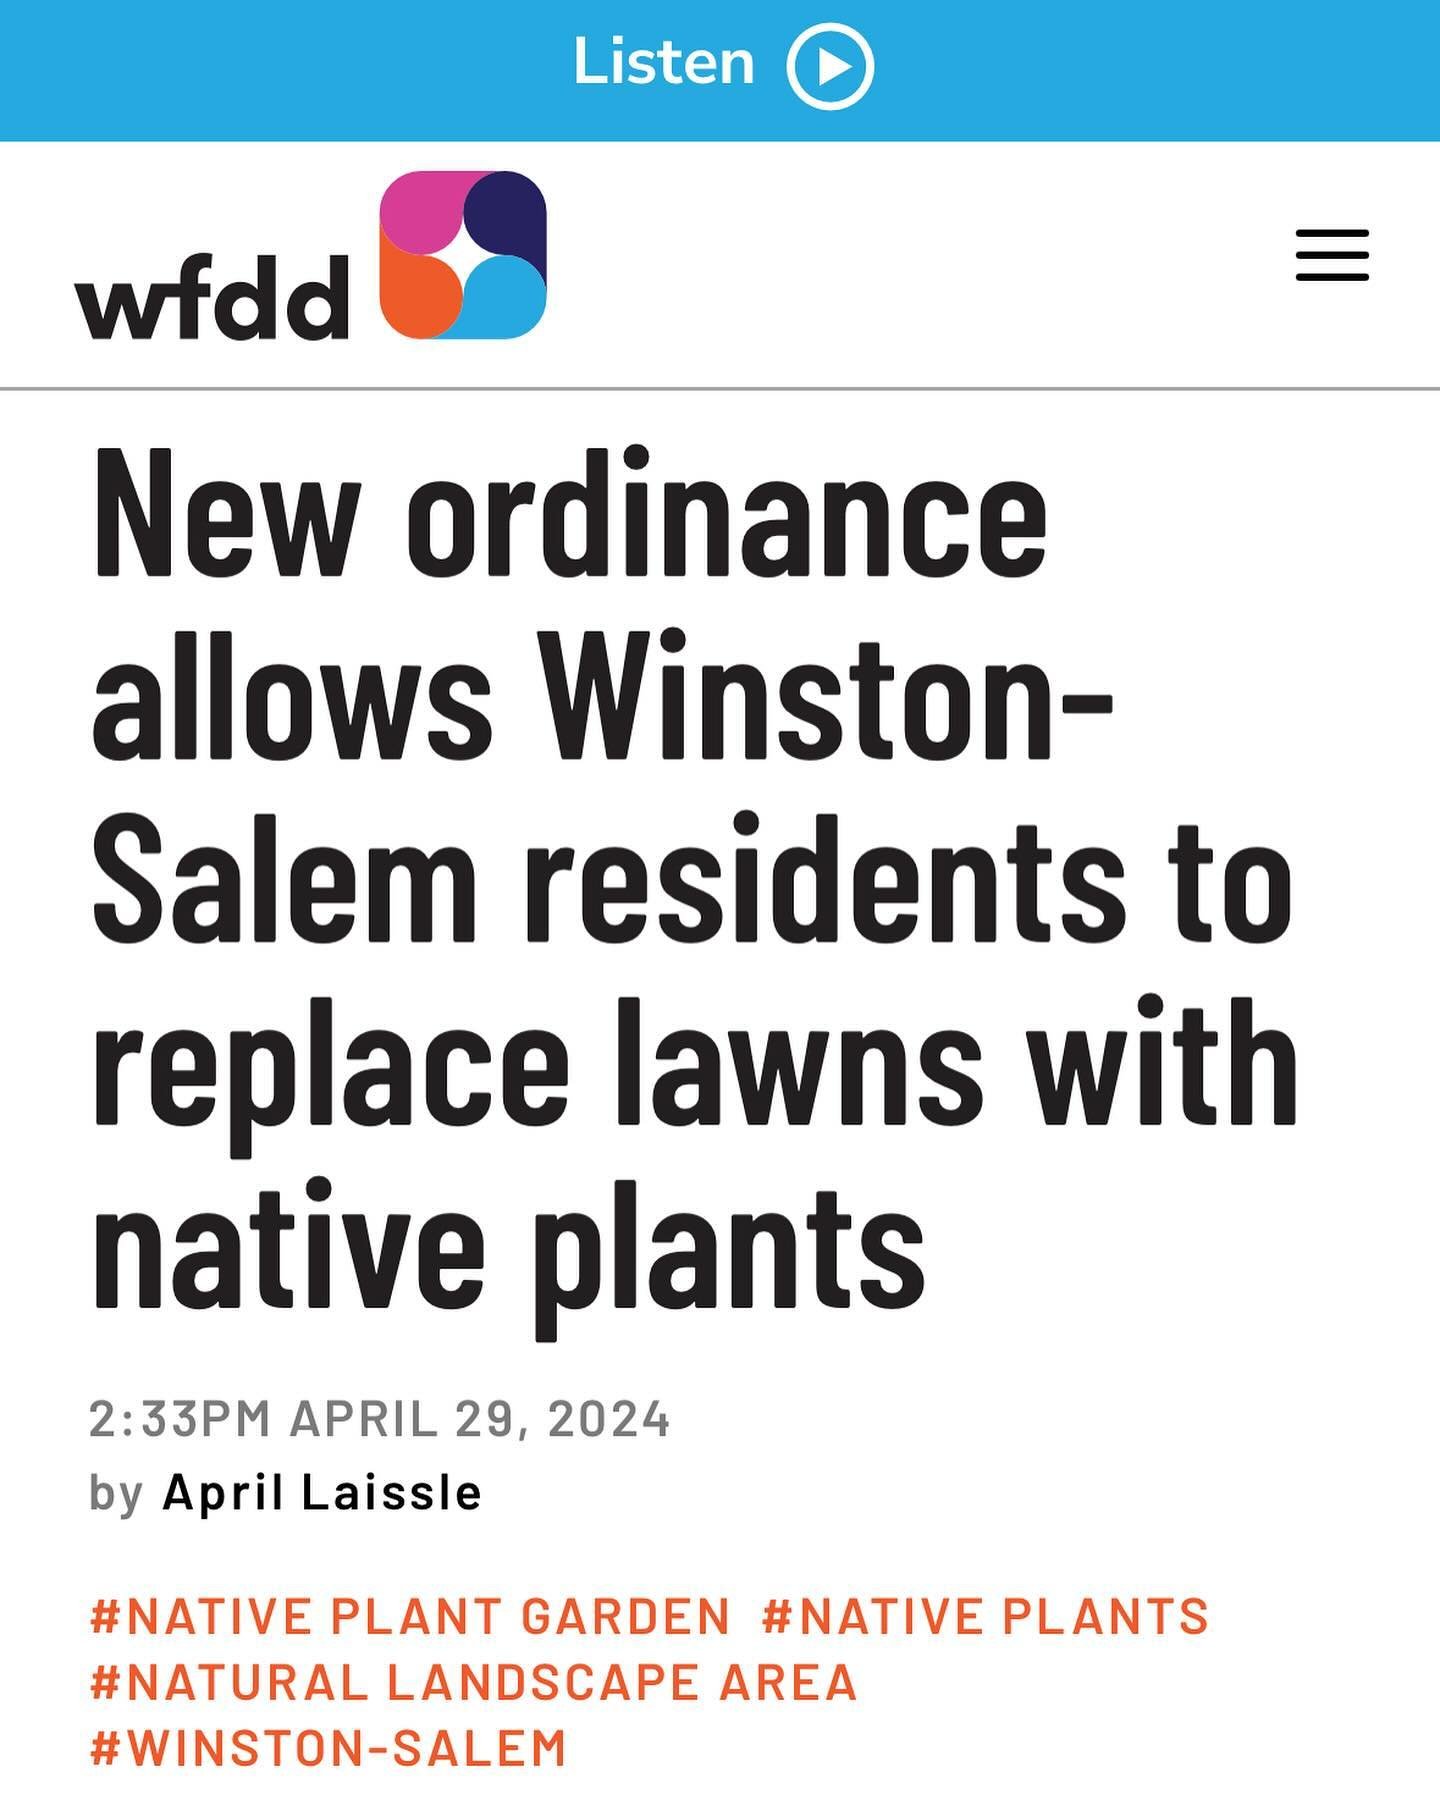 Give it a listen or read! Exciting news about the new and improved lawn ordinance for Winston-Salem, featuring Max! ➡️ https://www.wfdd.org/story/new-ordinance-allows-winston-salem-residents-replace-lawns-native-plants #grow #lawntogarden #winstonsal